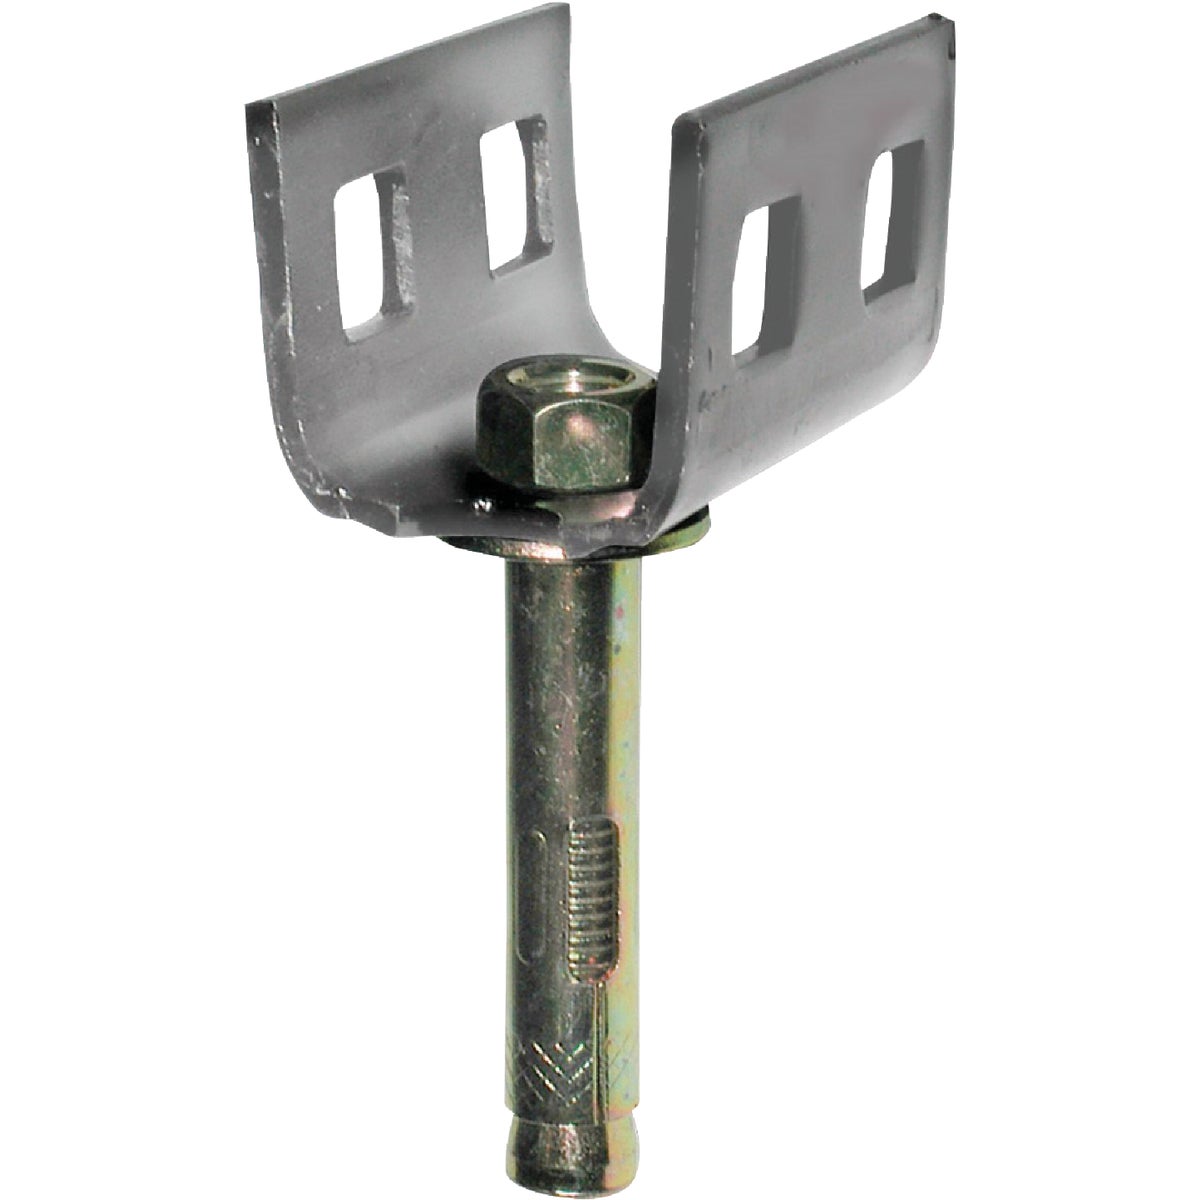 Item 723602, Mobile home patio anchor with expansion bolt.